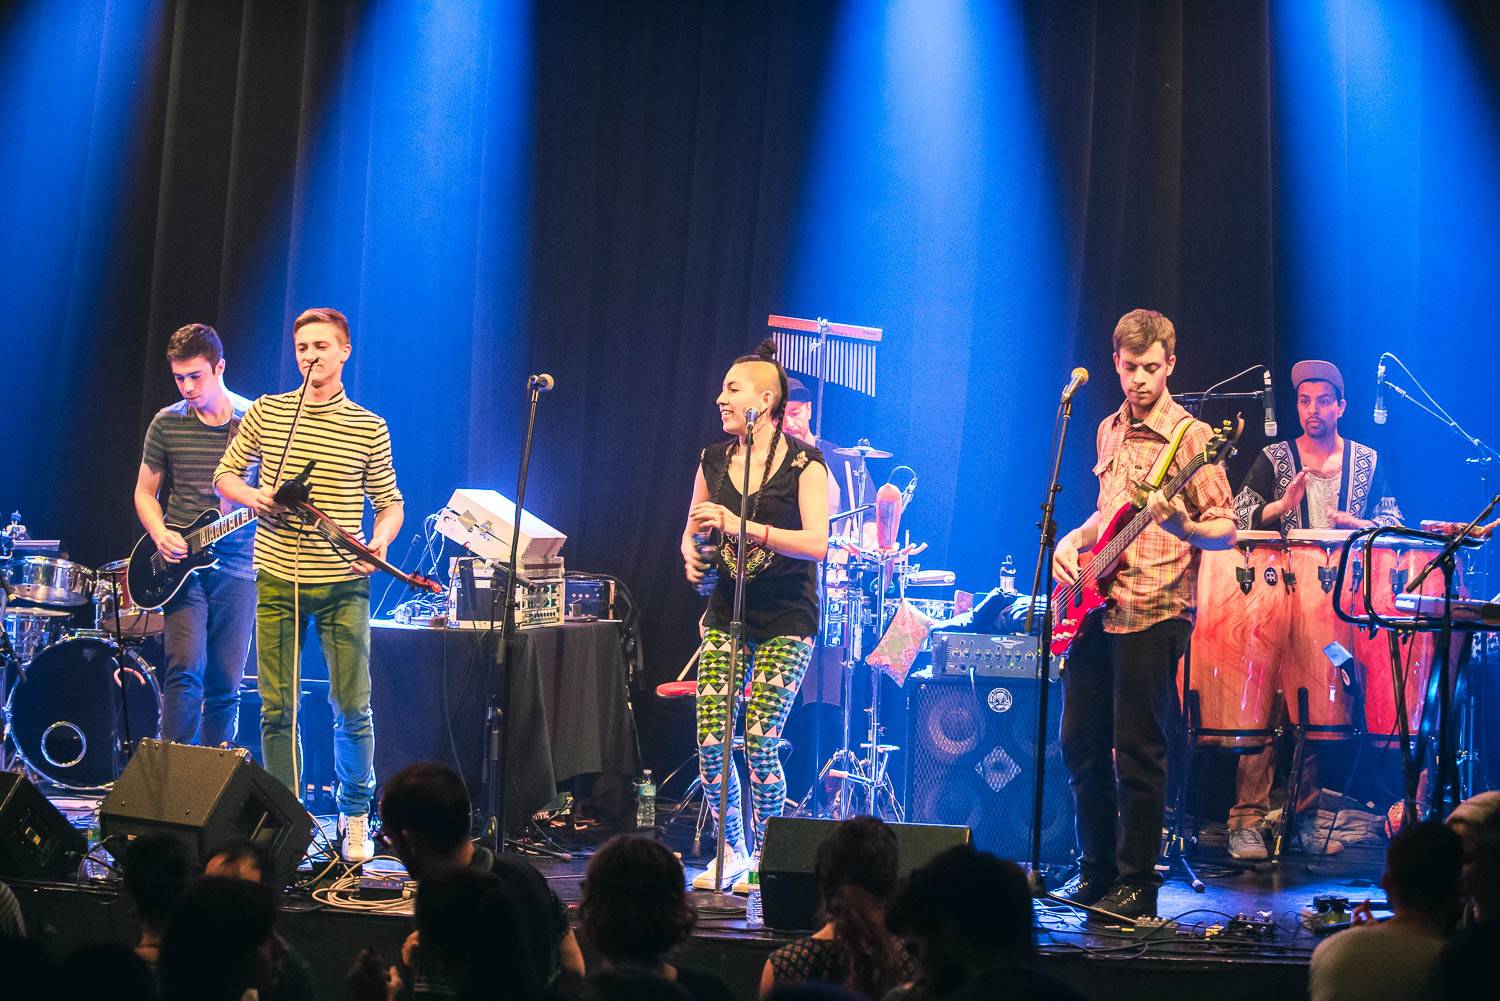 MNGWA at the Imperial, Vancouver, Oct. 15 2016. Pavel Boiko photo